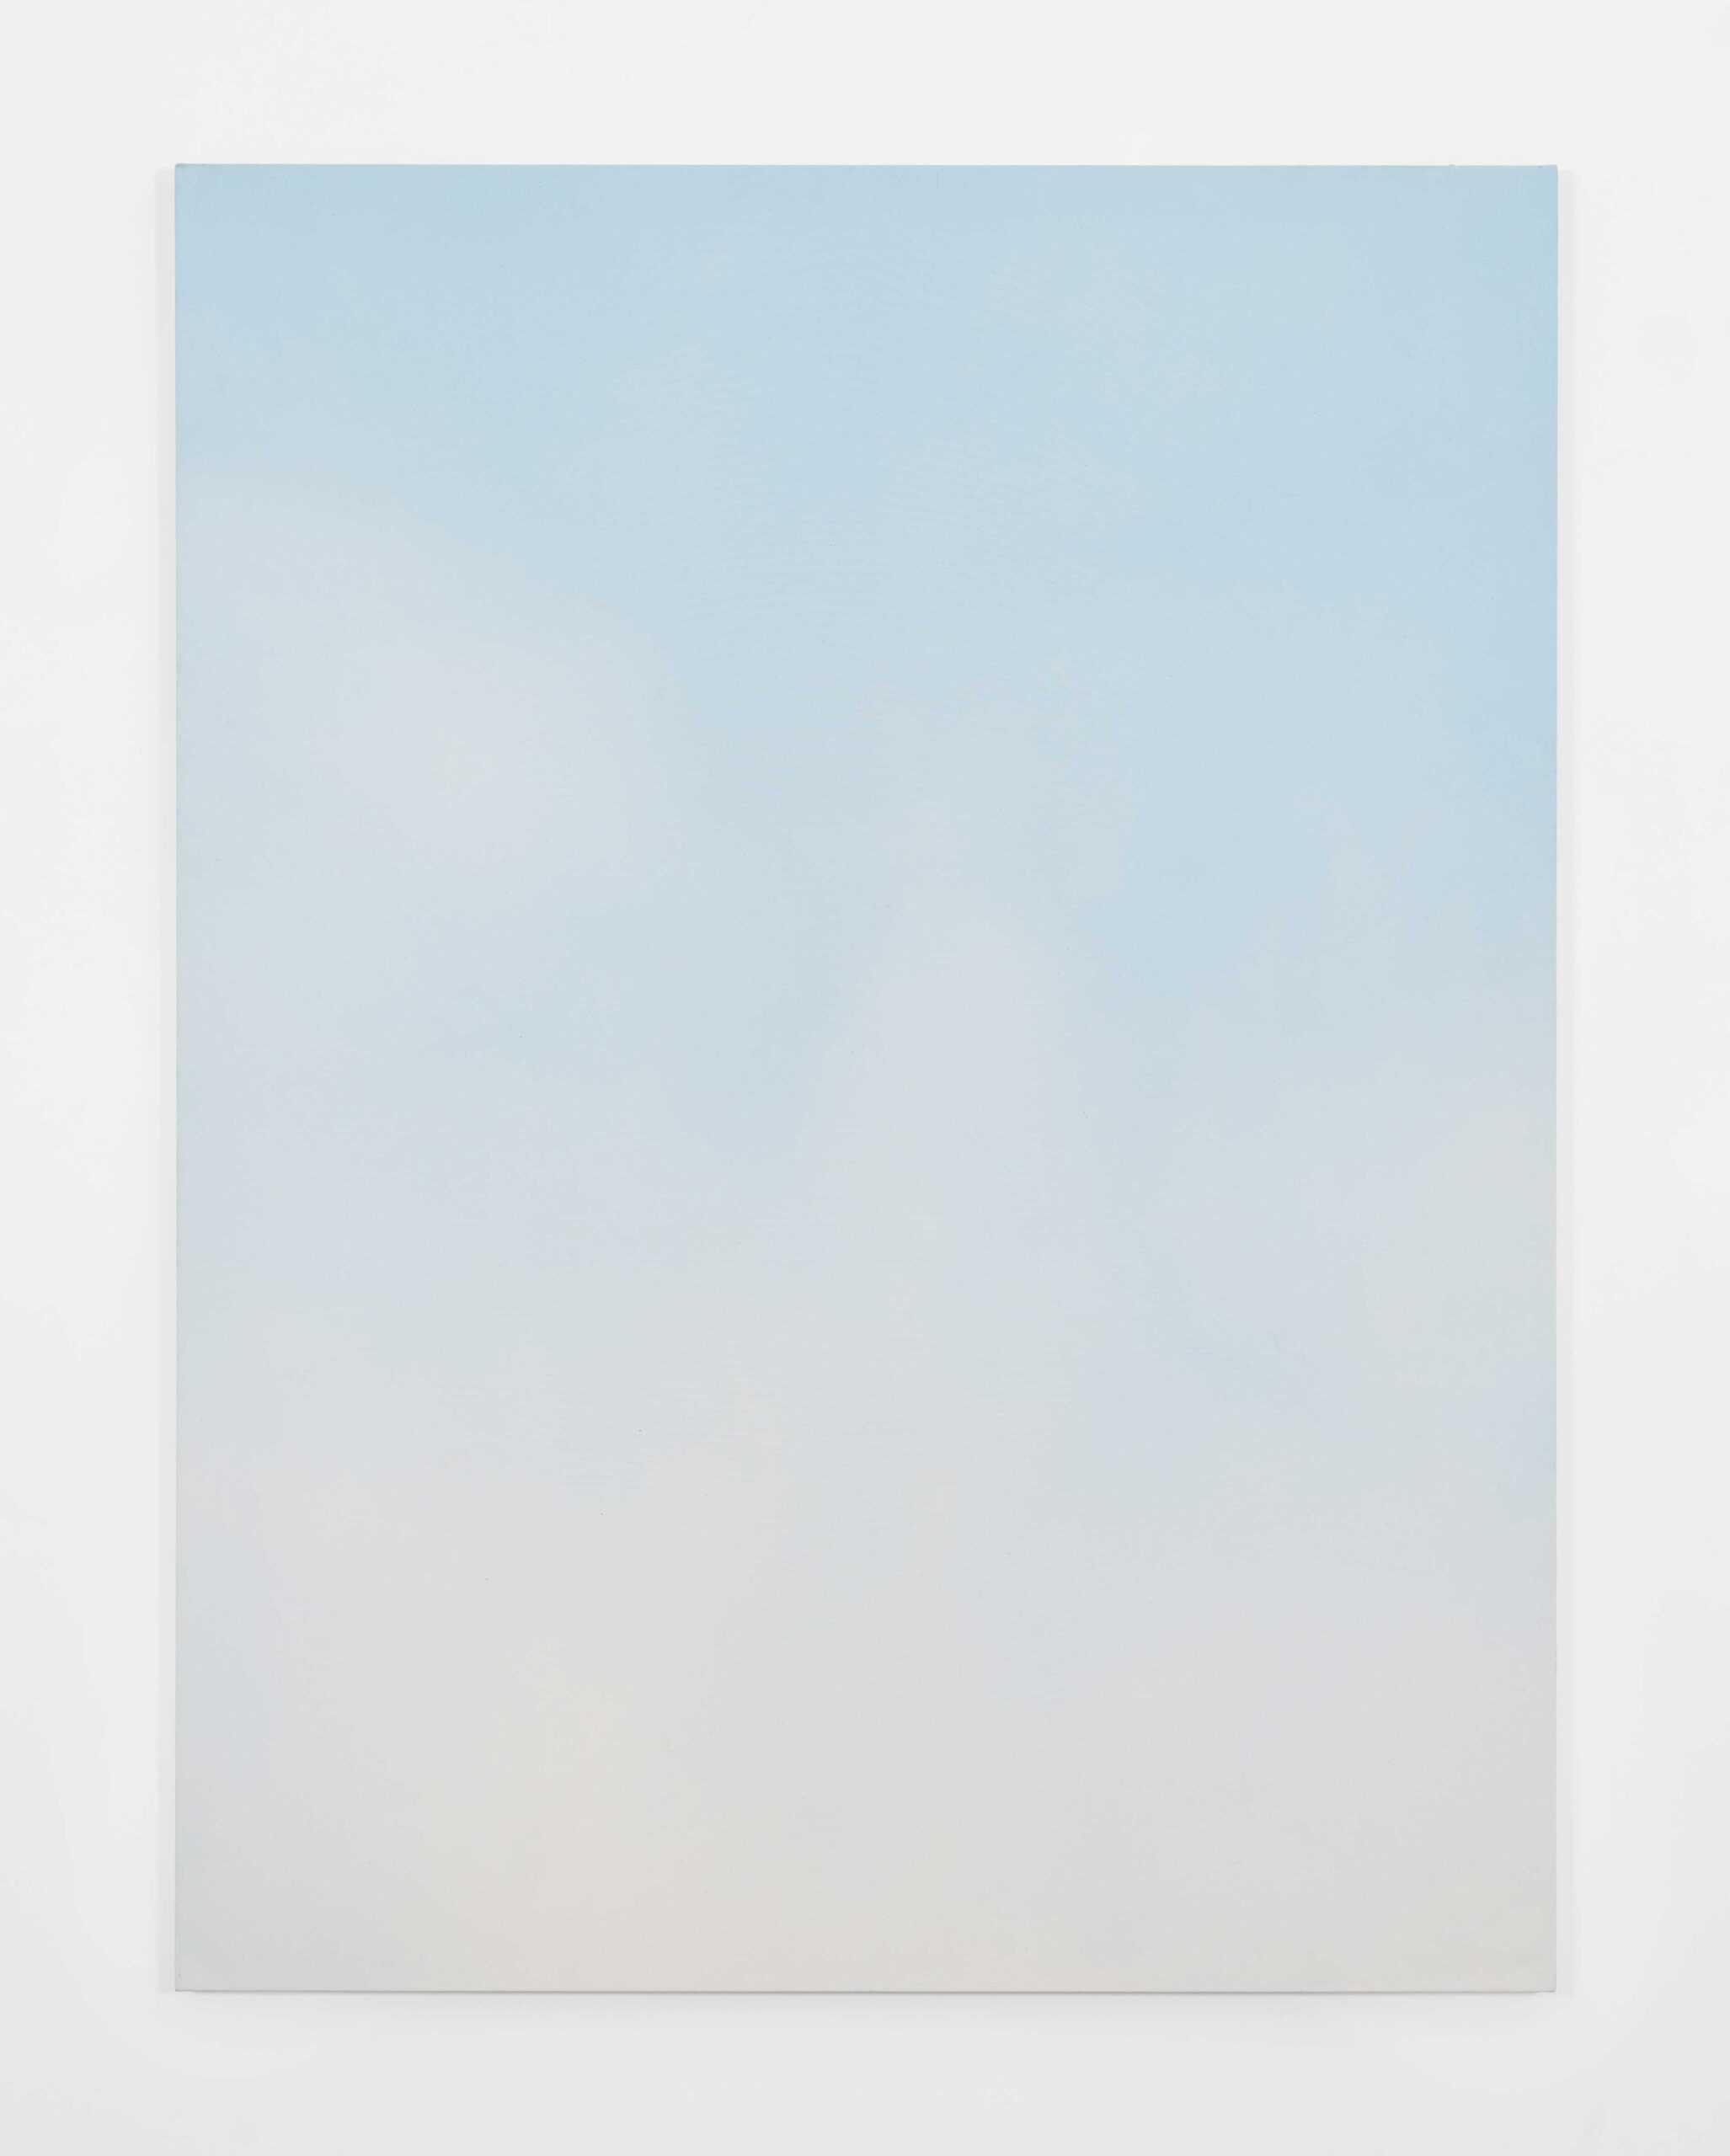 Rebecca Partridge, Sky Painting 11, 2020, watercolour on canvas, Time + Place, Huxley-Parlour Gallery, 3-5 Swallow Street, March - April 2024